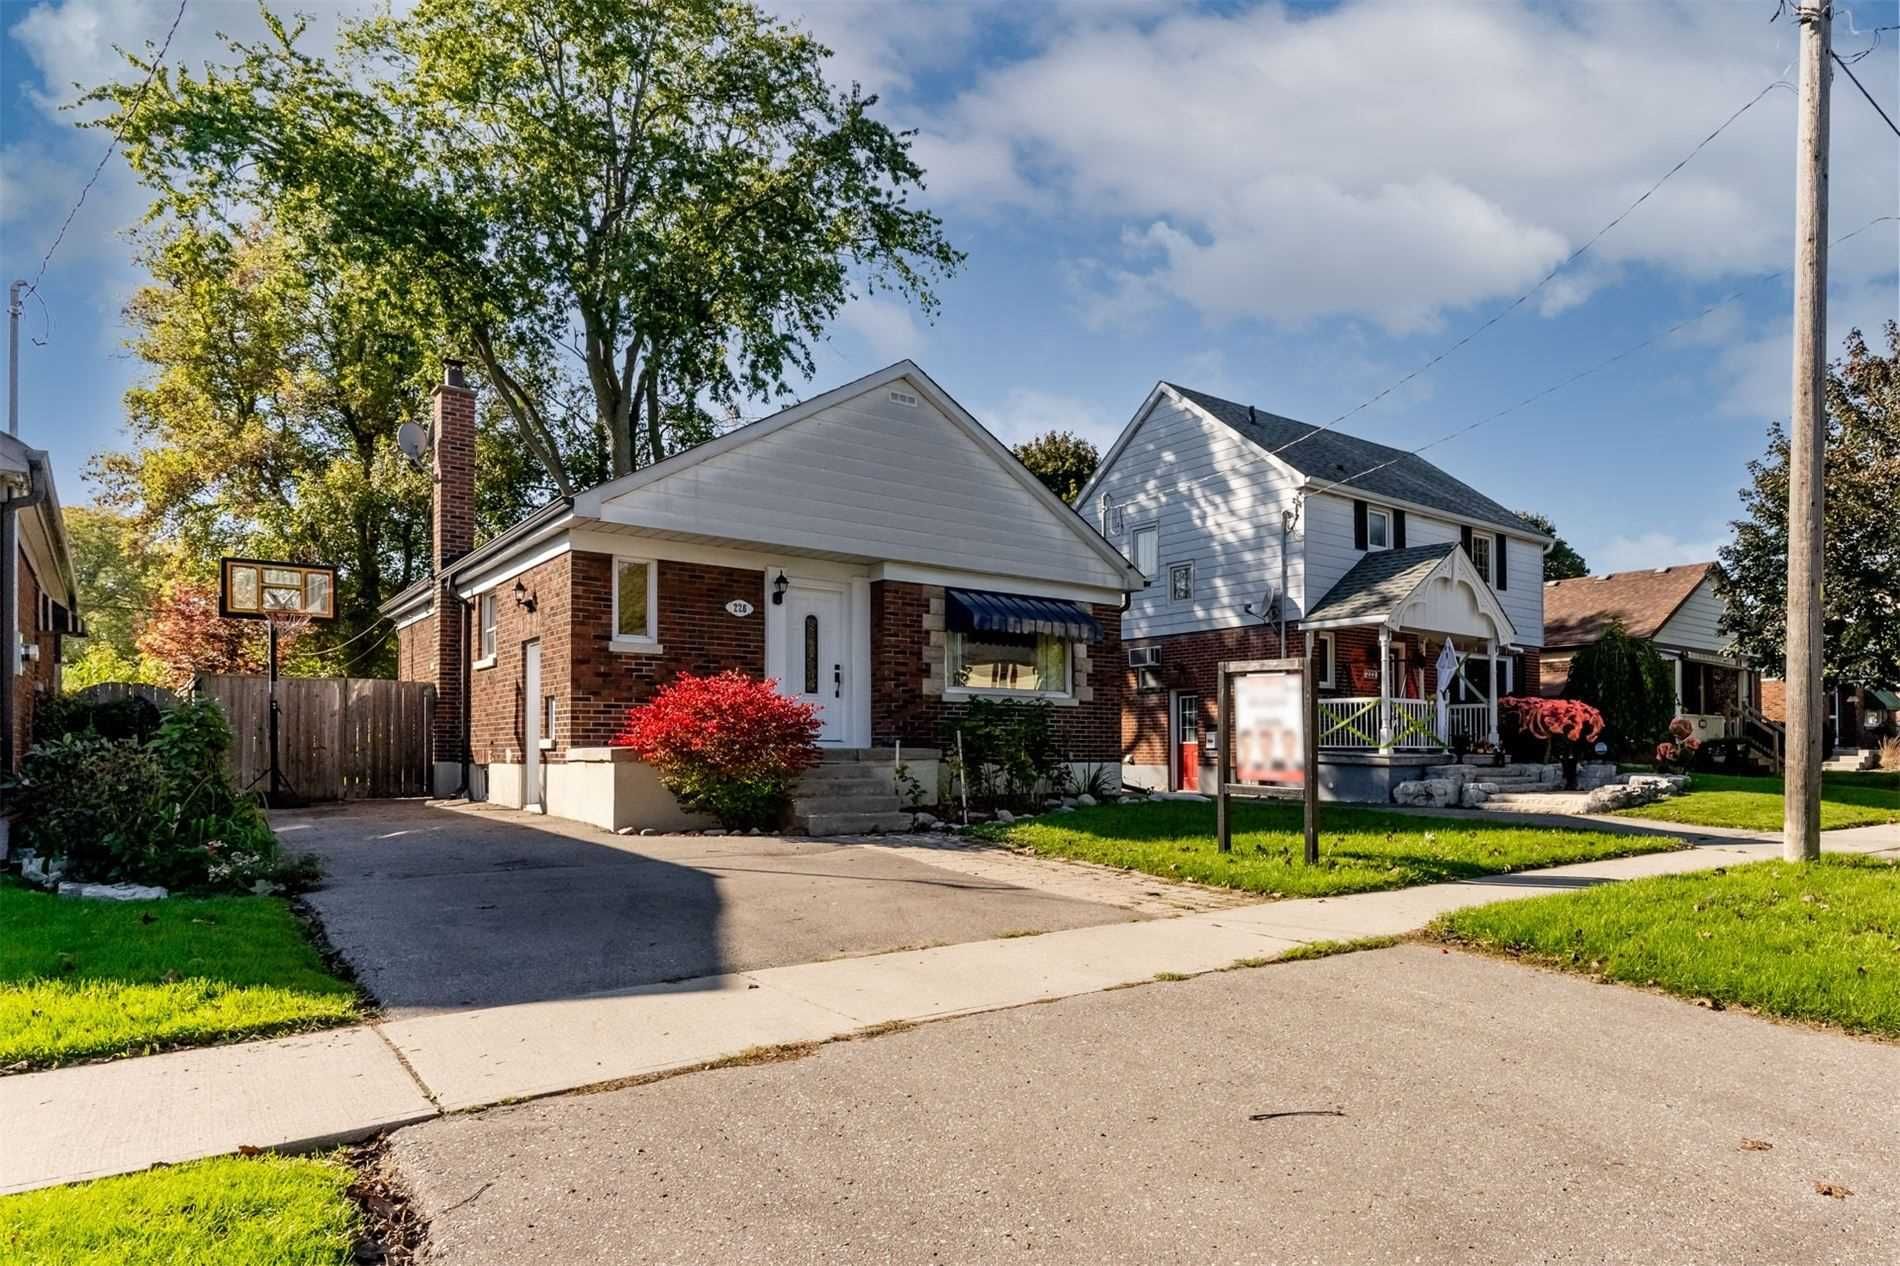 New property listed in Central, Oshawa